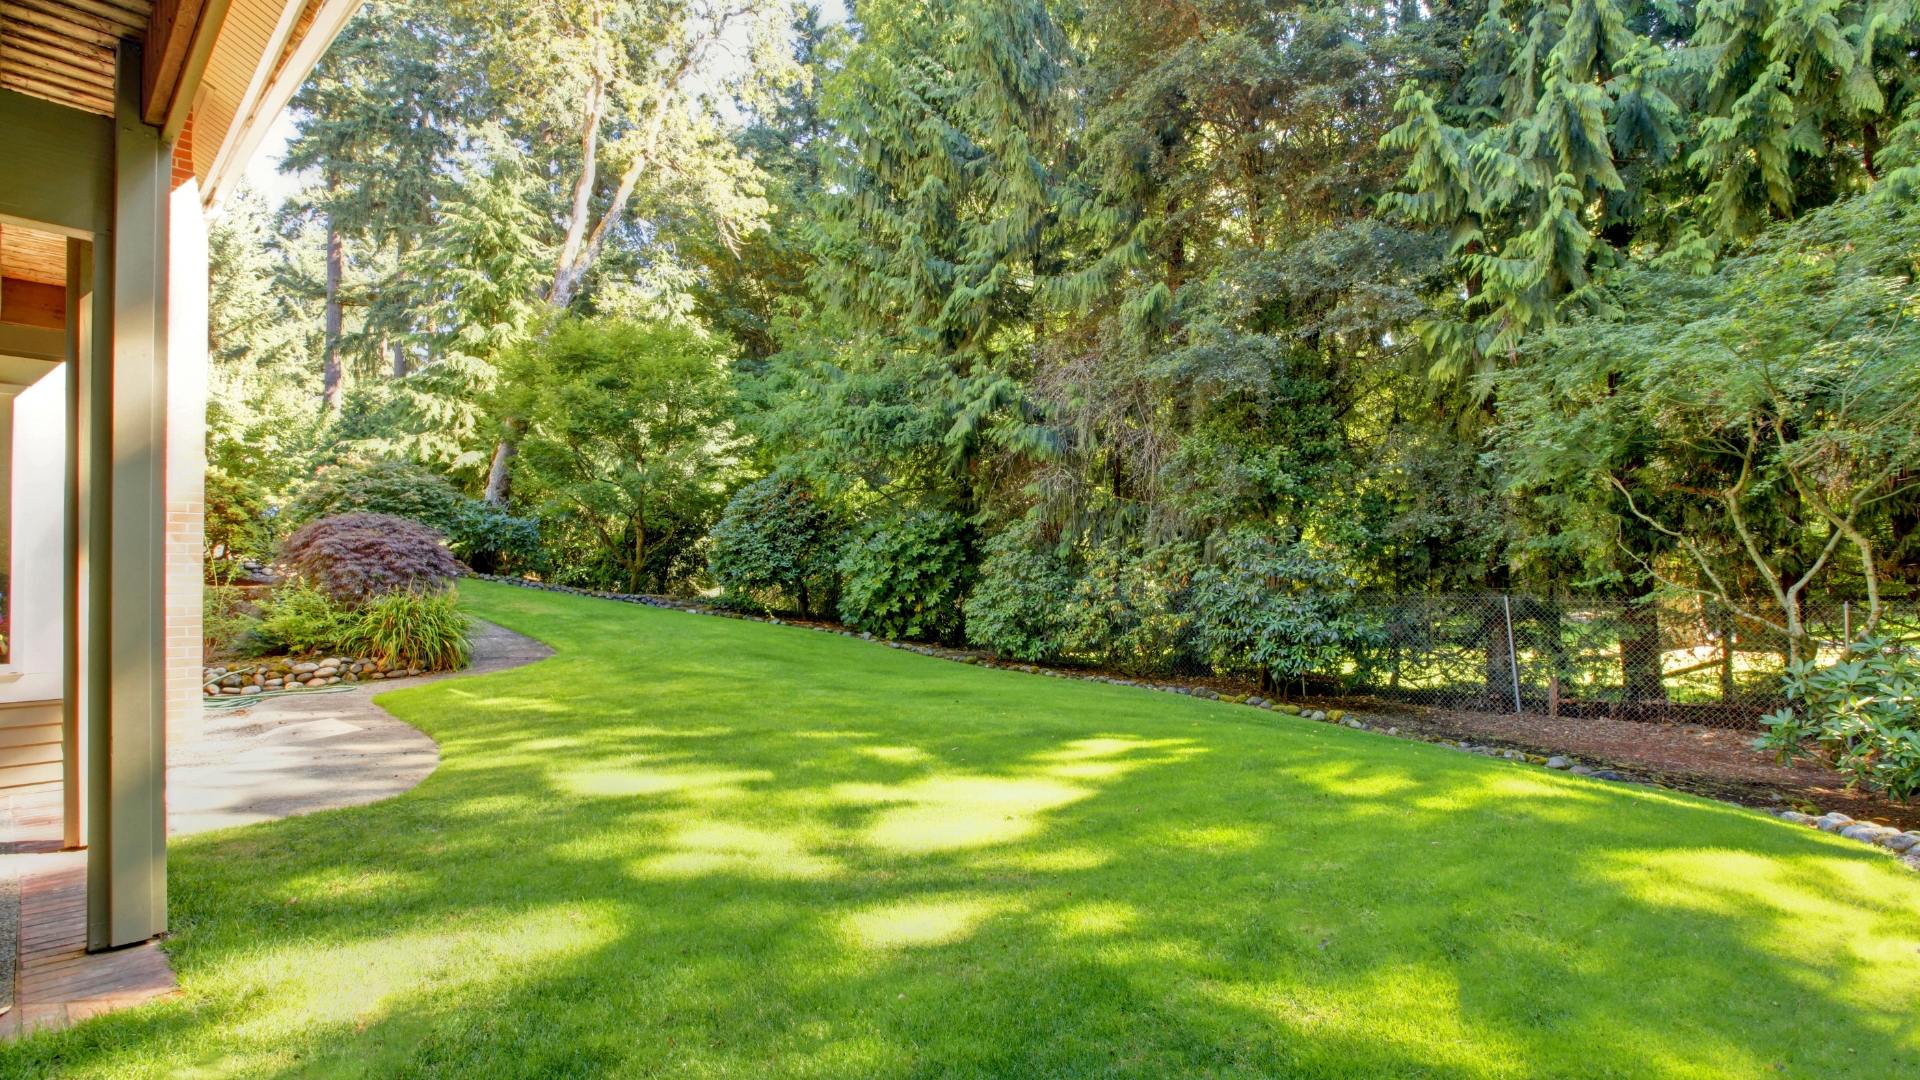 If You Want Your Lawn Lush And Green, Follow These 7 Spring Care Steps